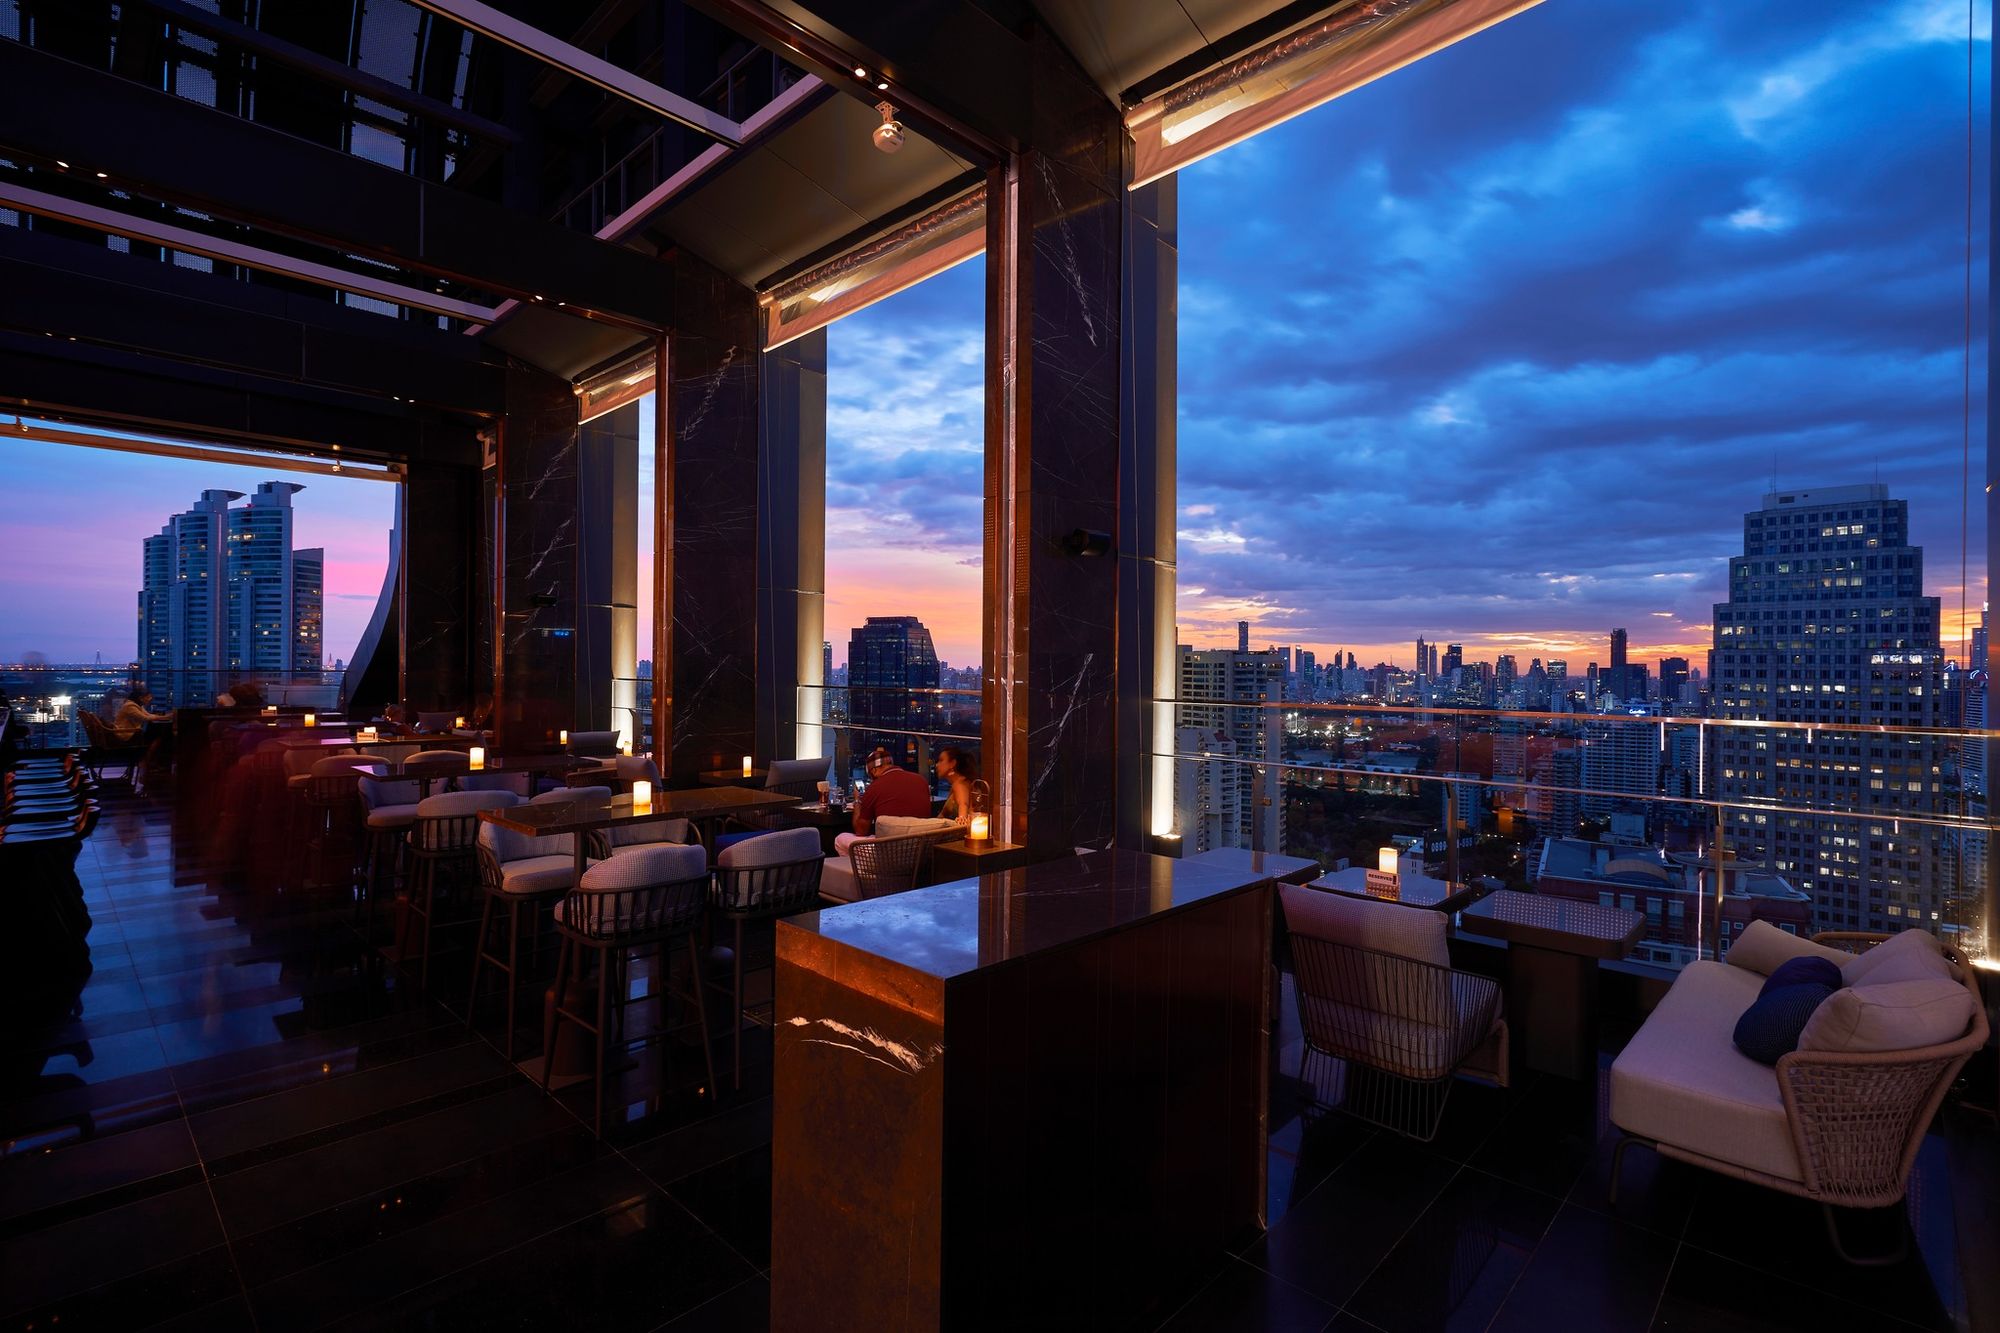 Nestled on the 34th floor of the Carlton Hotel, this bar offers breathtaking views of the city.